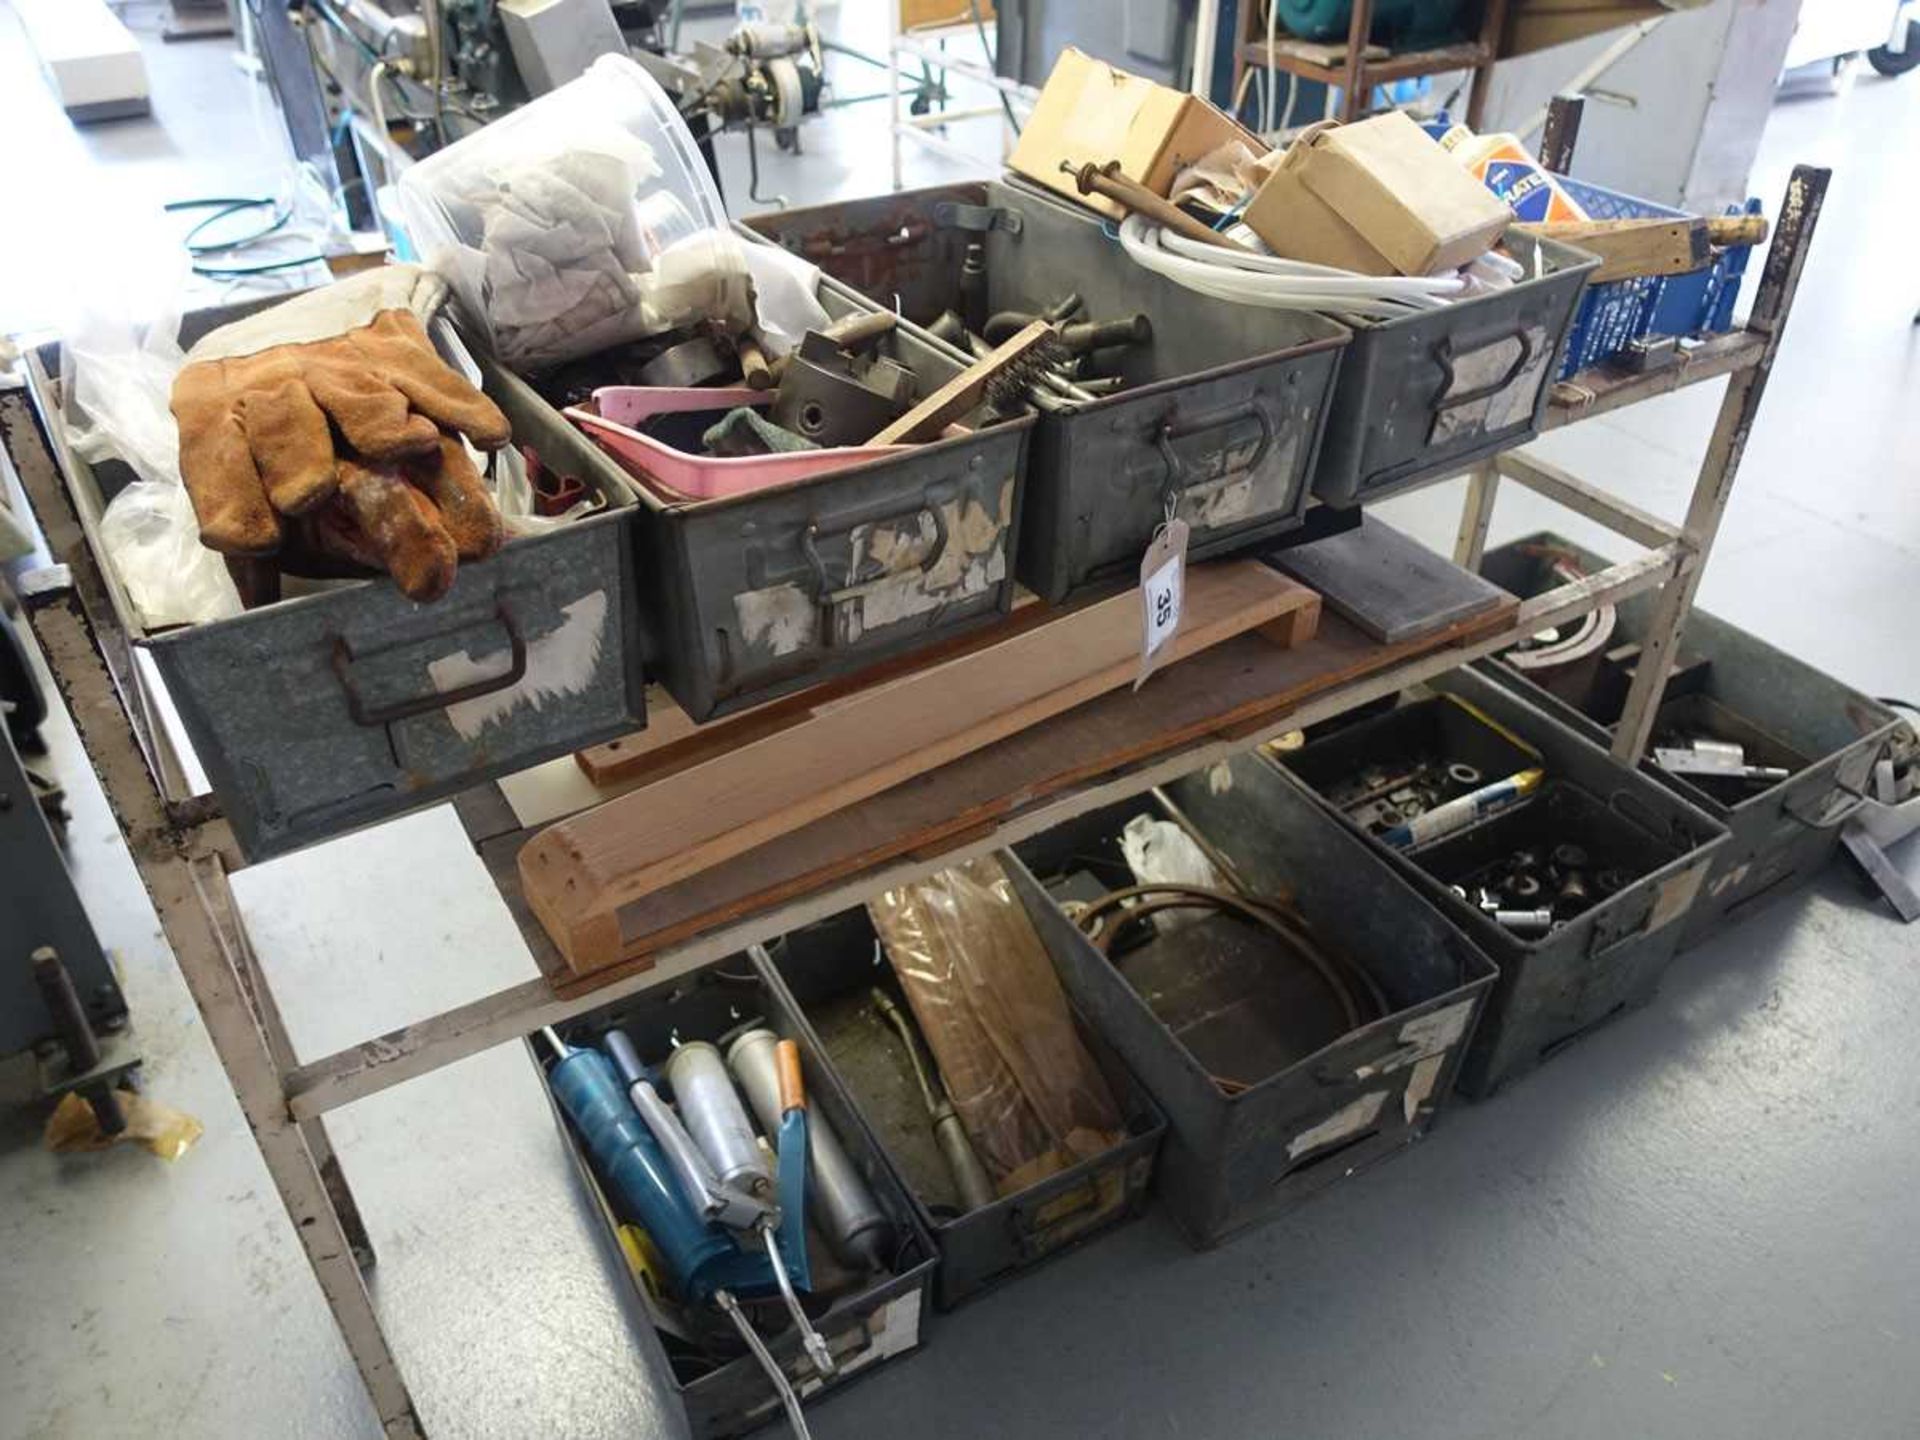 +VAT Nine various tote trays with contents of various tooling, chucks, consumables and spares,